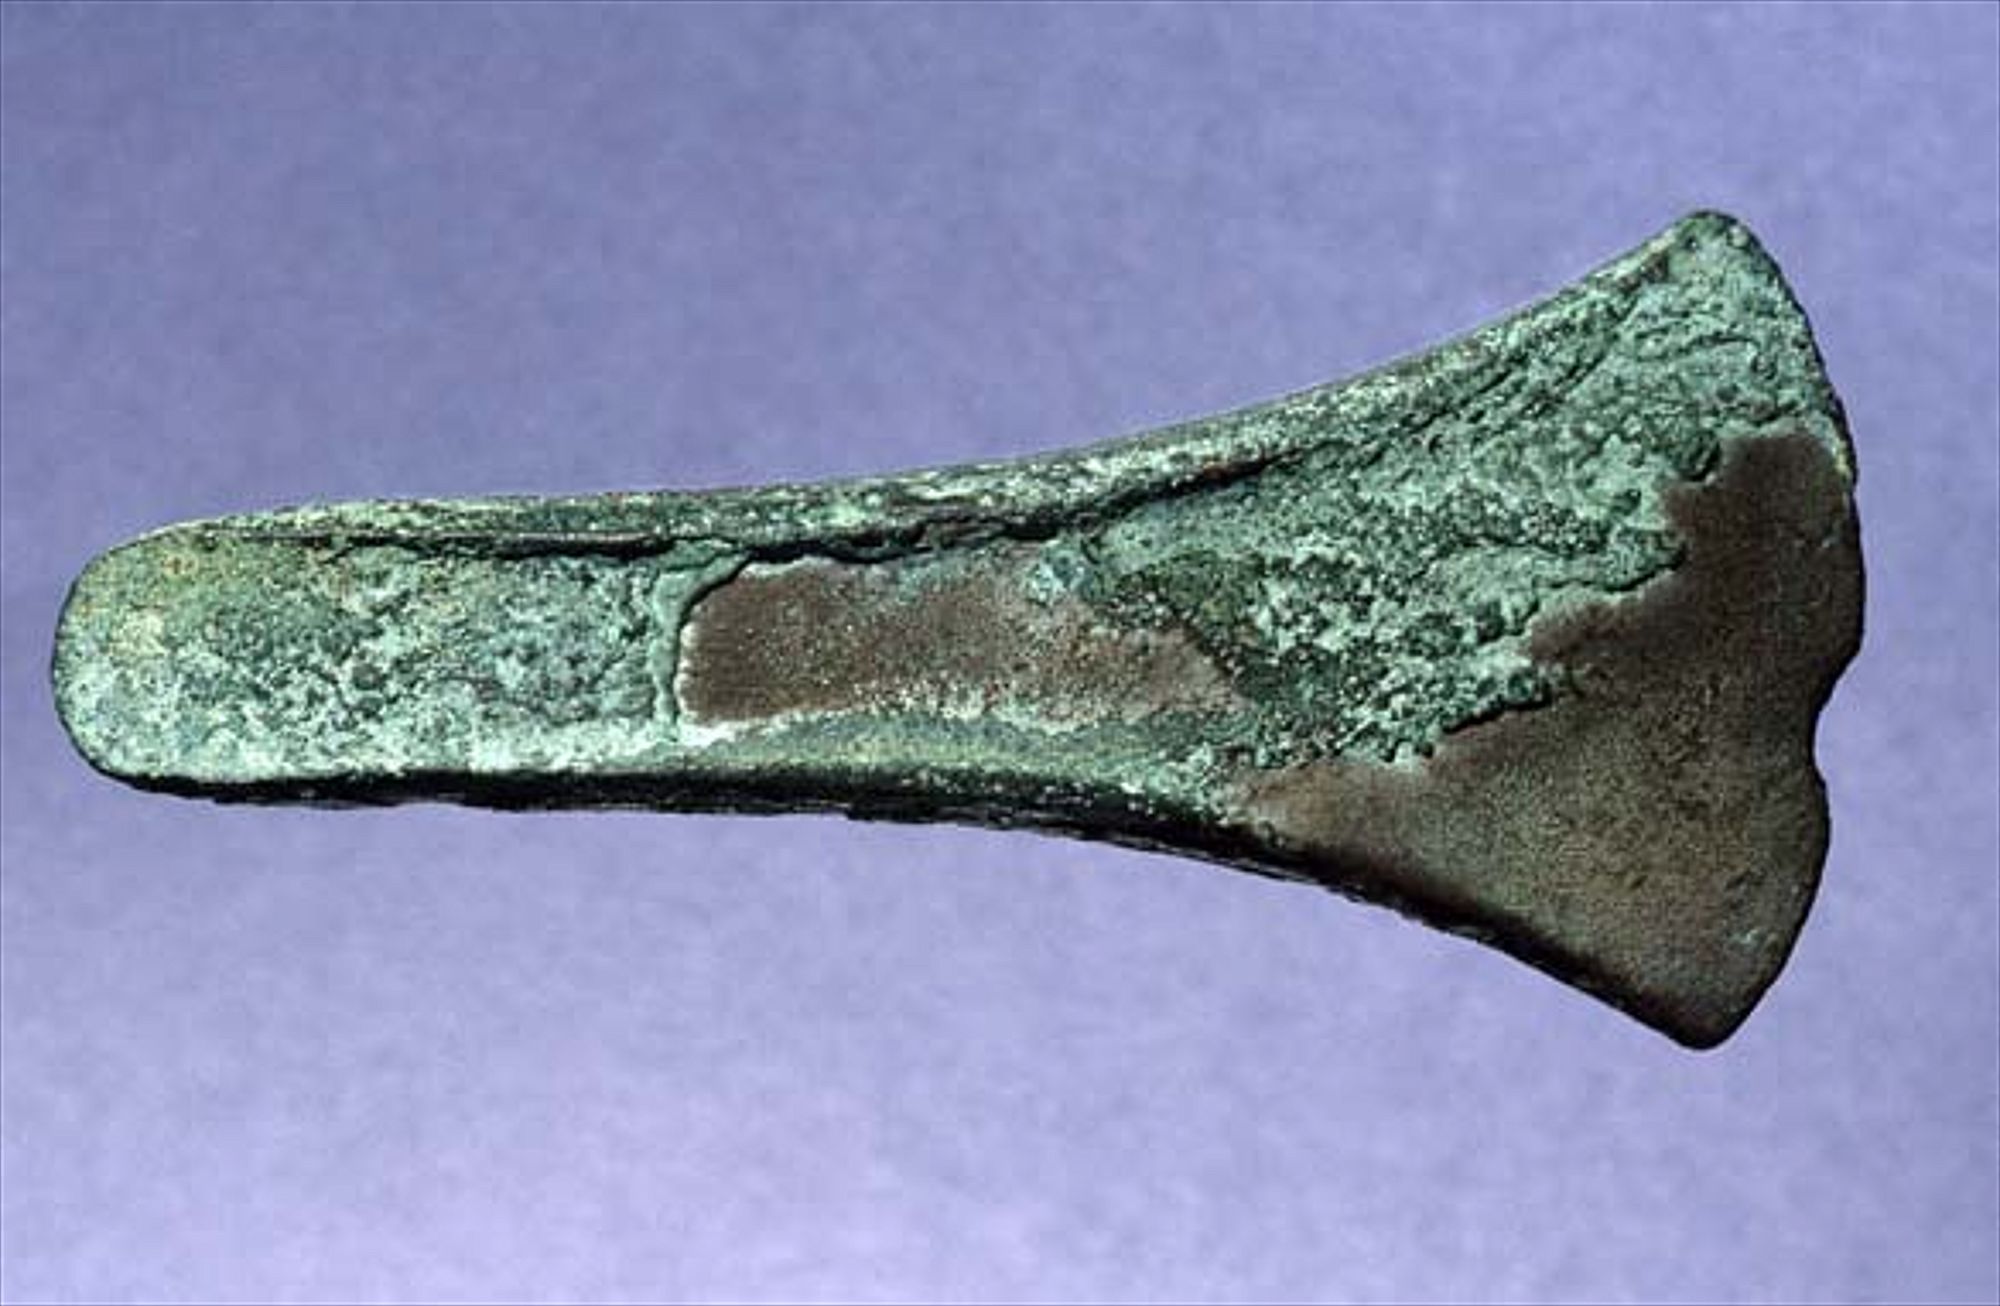 Bronze axe head, similar to the ones likely used in Seahenge's construction.